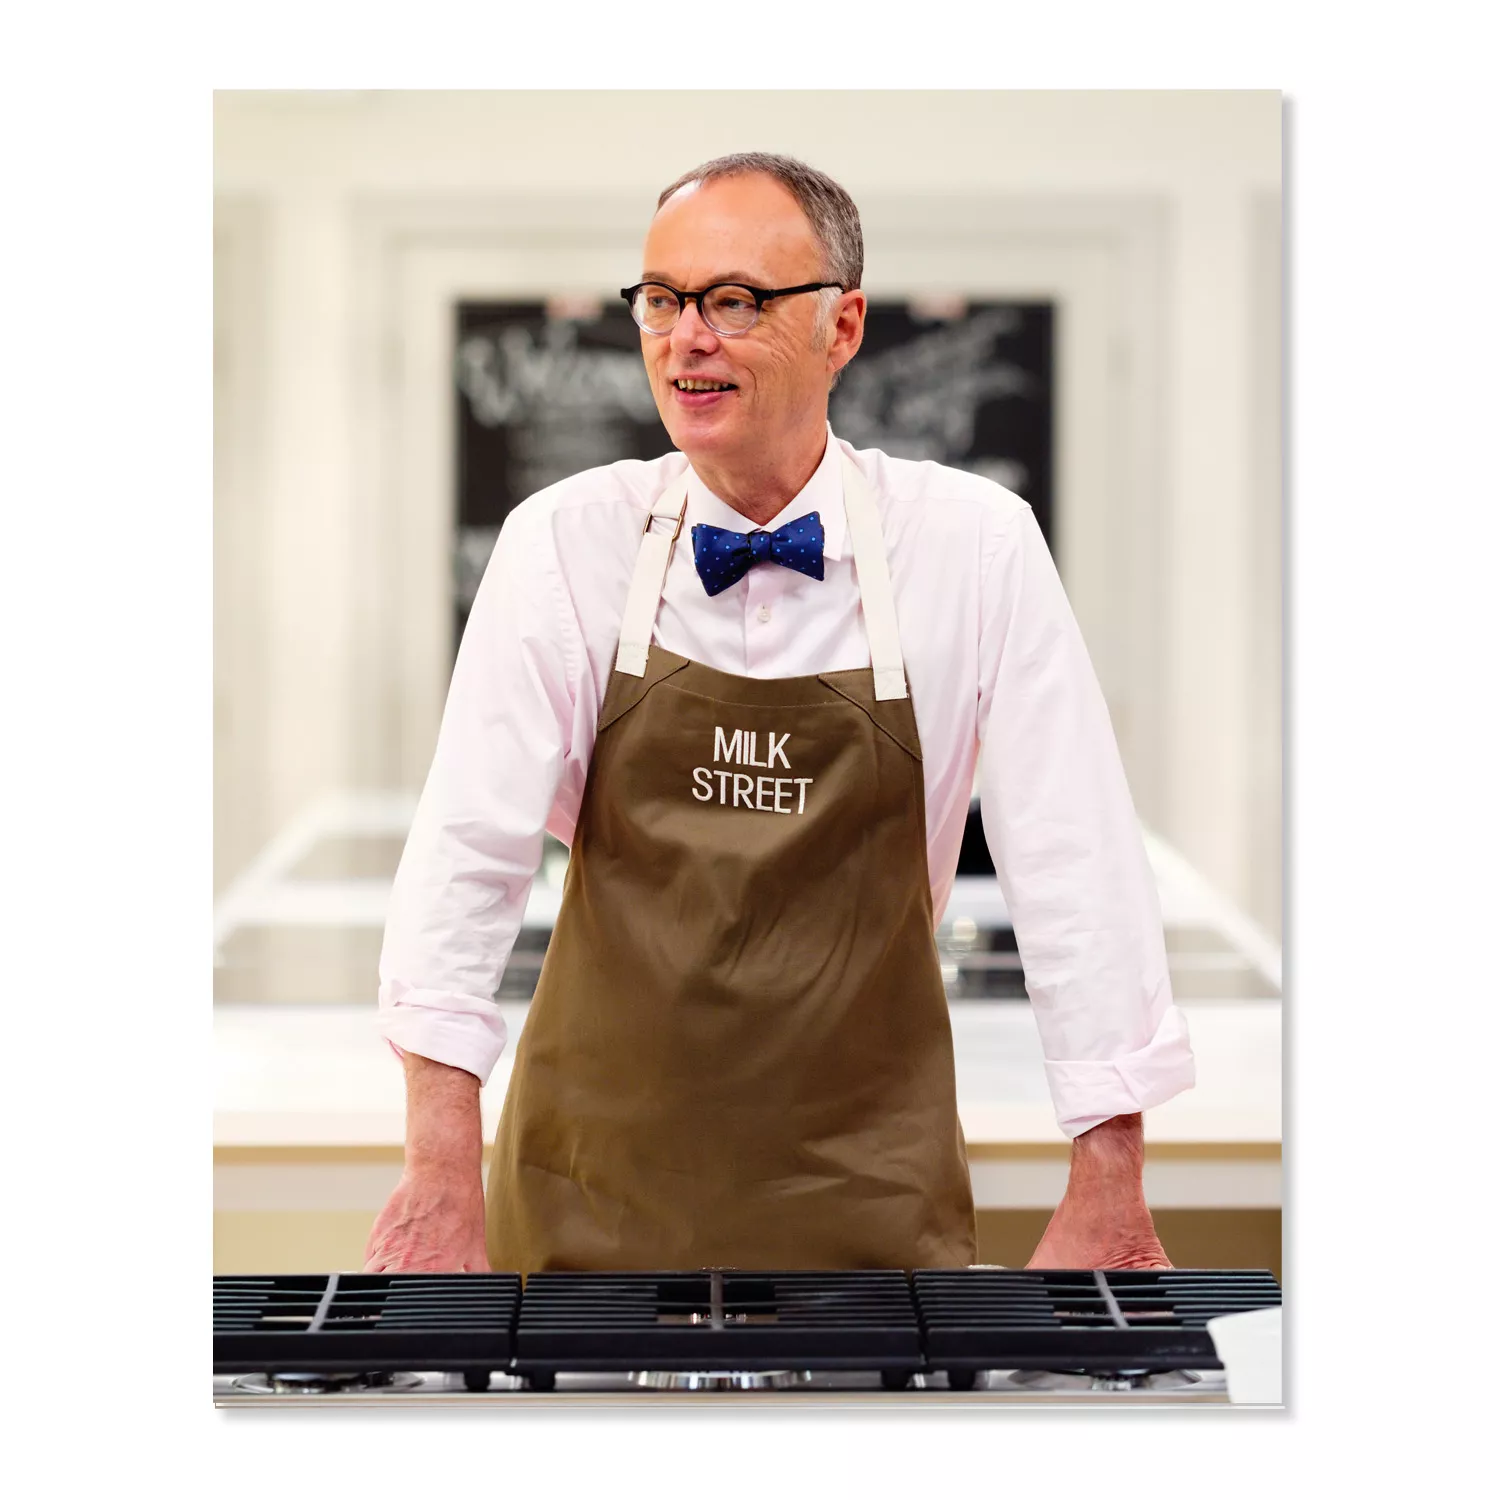 Christopher Kimball&#8217;s Milk Street: The New Home Cooking